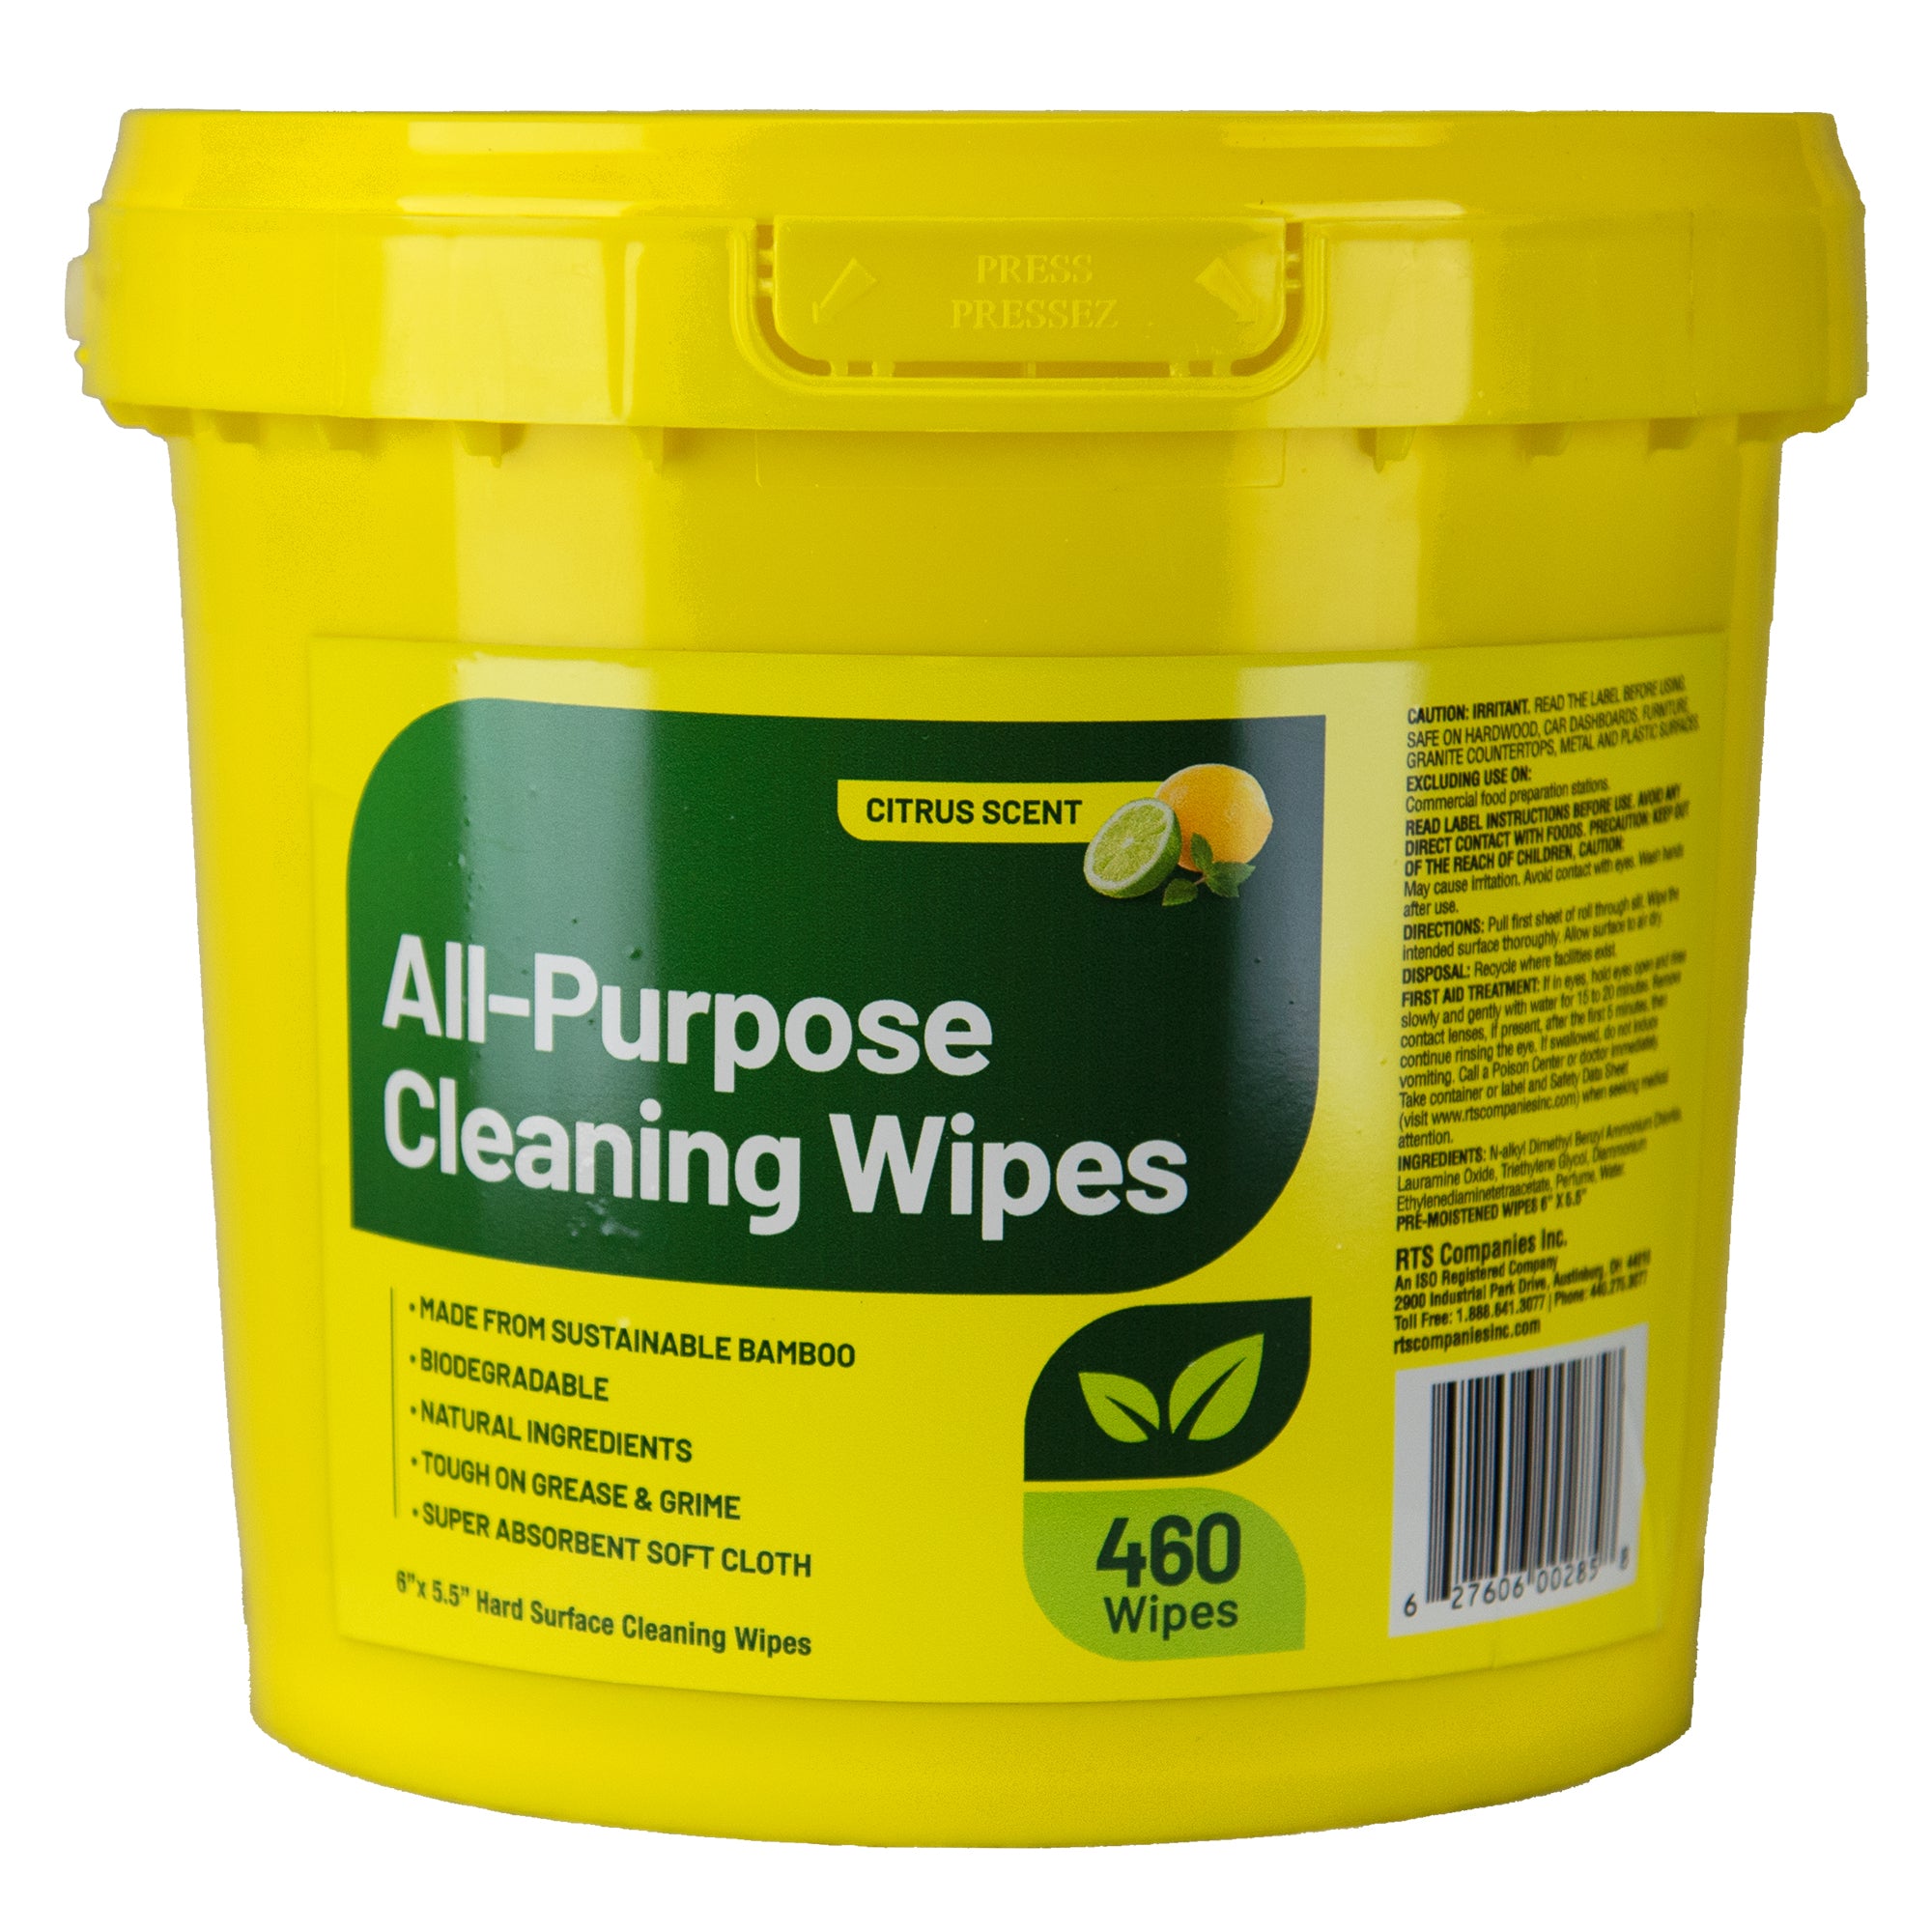 All-Purpose Cleaning Wipes, yellow bucket of 460 wipes on a white background